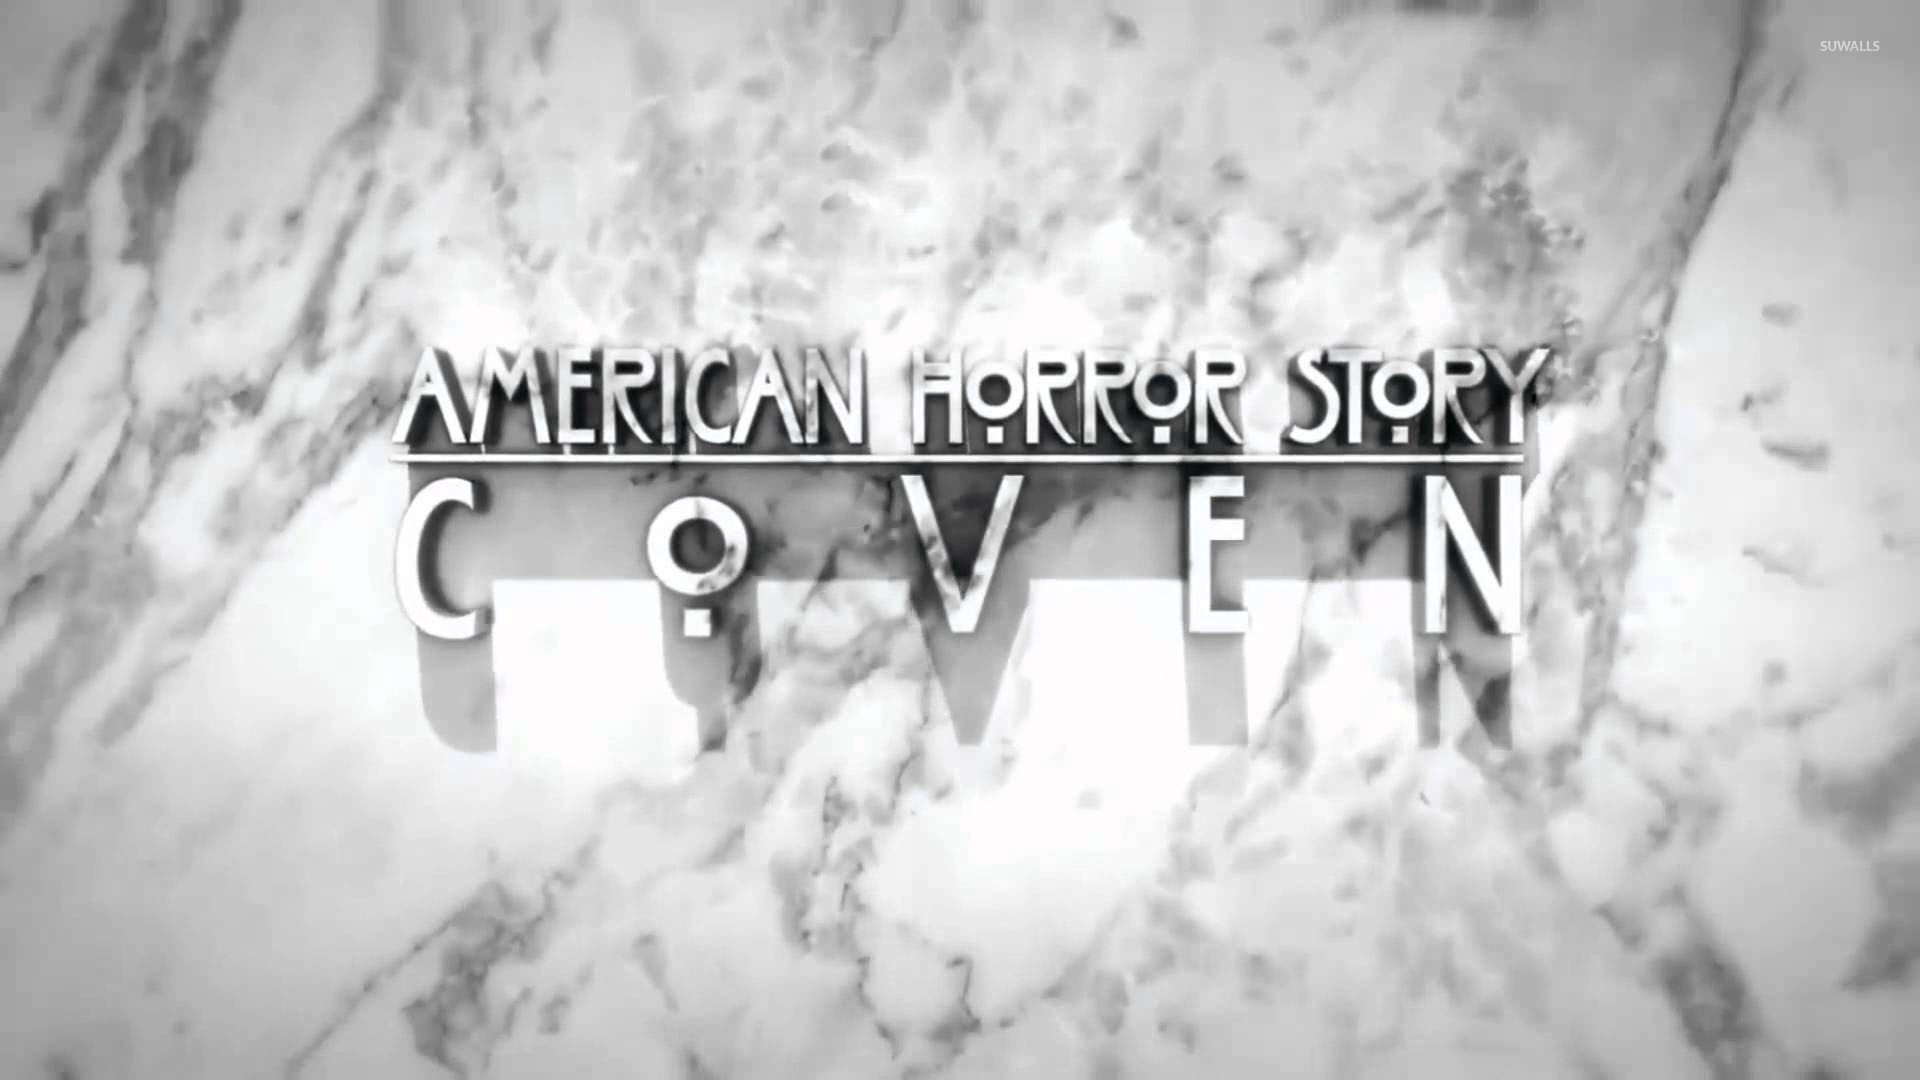 American Horror Story   Coven wallpaper   TV Show wallpapers   27971 1920x1080